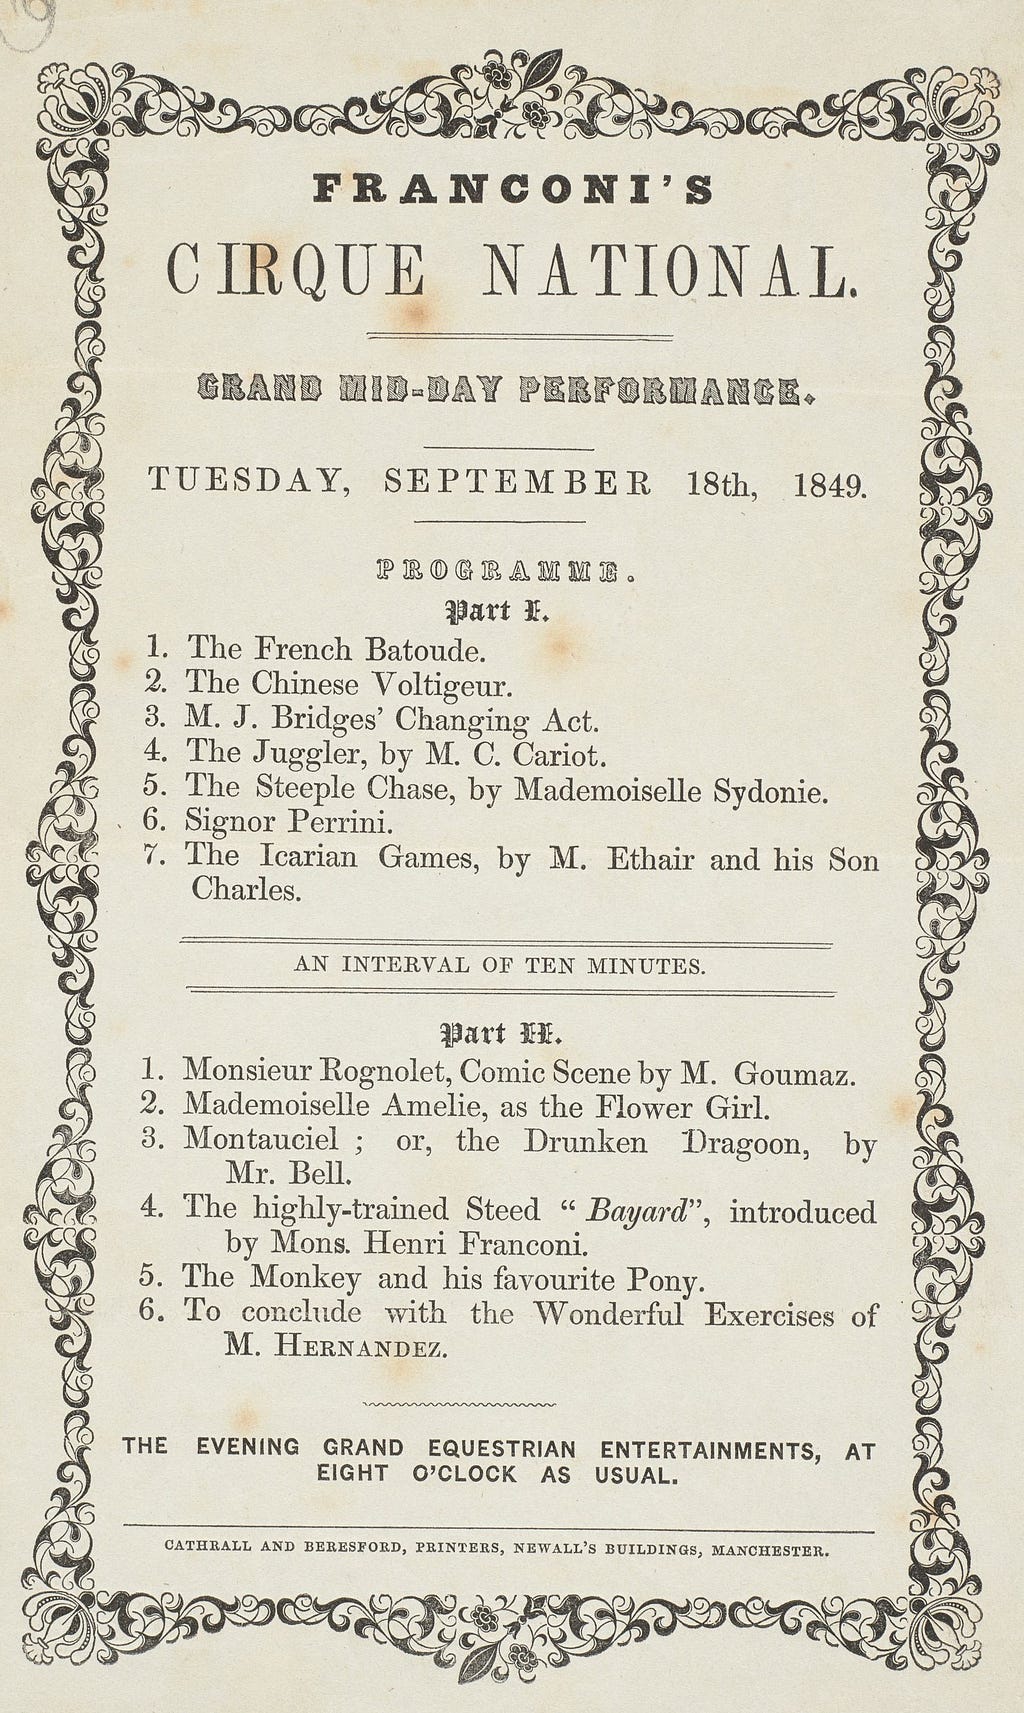 19th-century circus handbill listing a total of thirteen acts plus a ten minute interval. Printed within a decorative border.